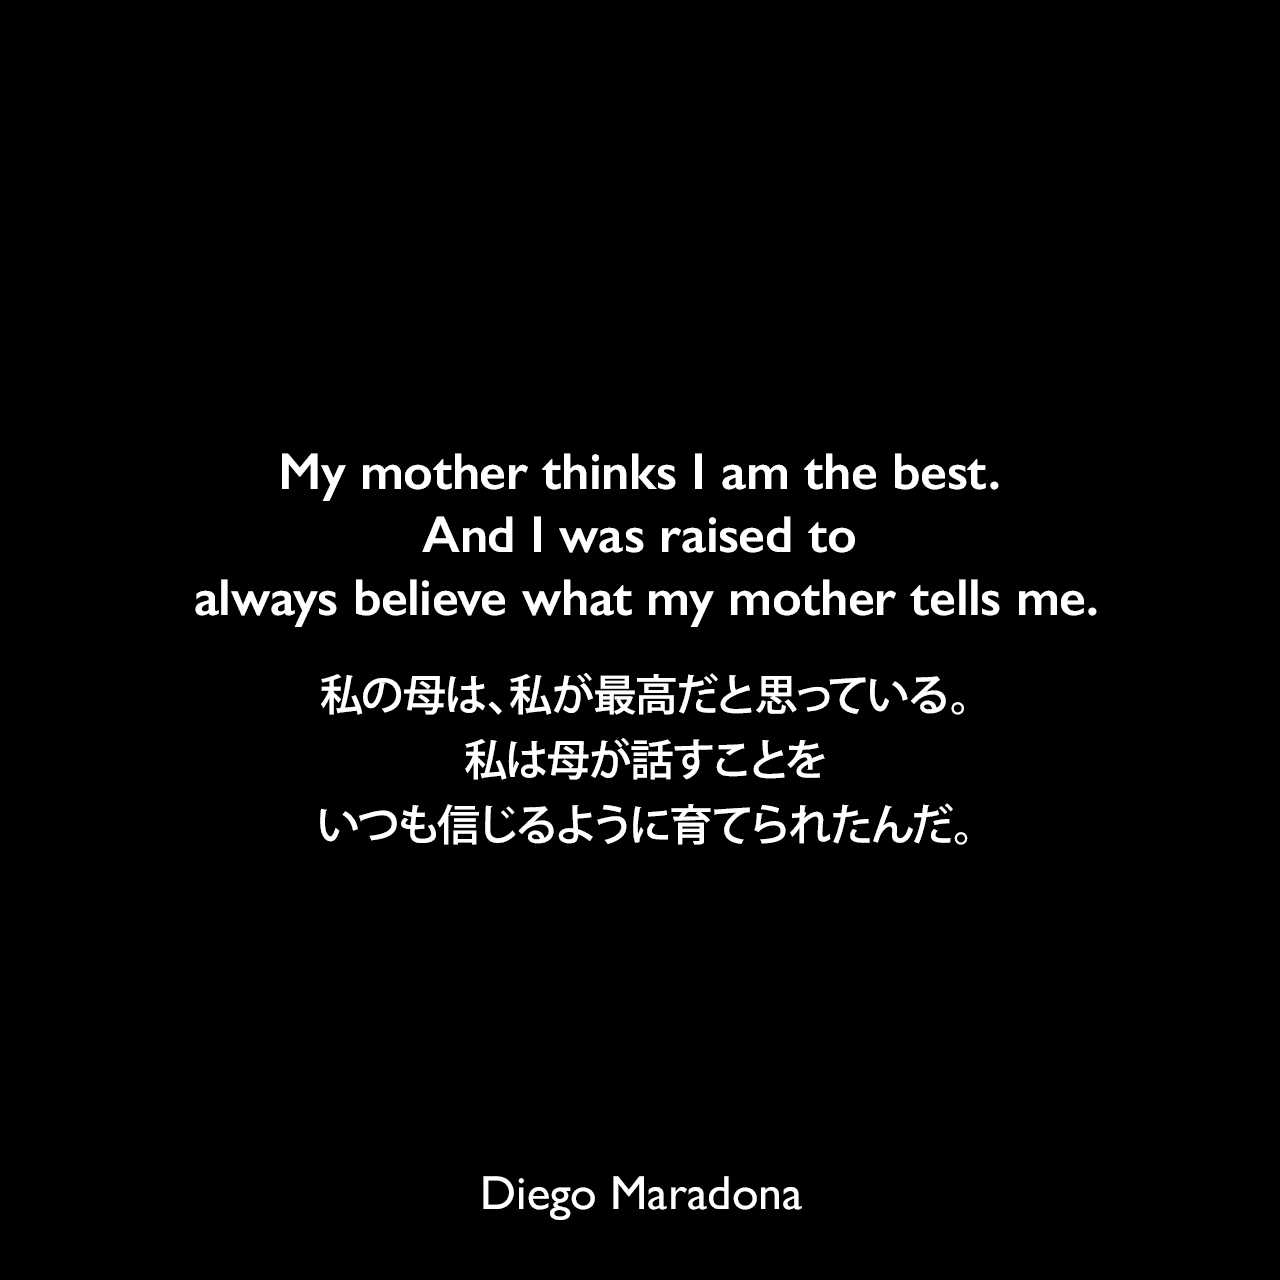 My mother thinks I am the best. And I was raised to always believe what my mother tells me.私の母は、私が最高だと思っている。私は母が話すことをいつも信じるように育てられたんだ。Diego Maradona